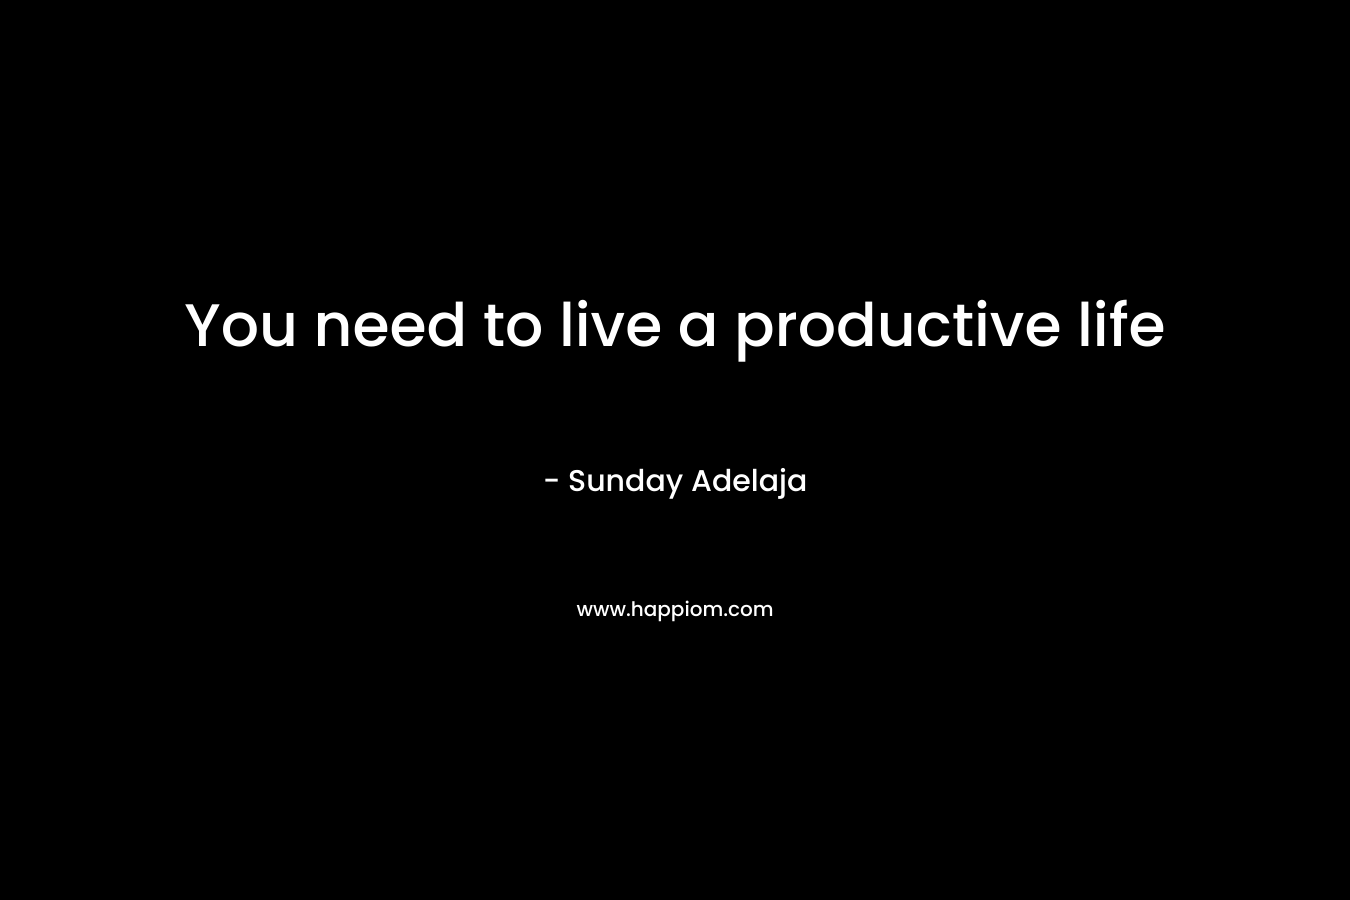 You need to live a productive life